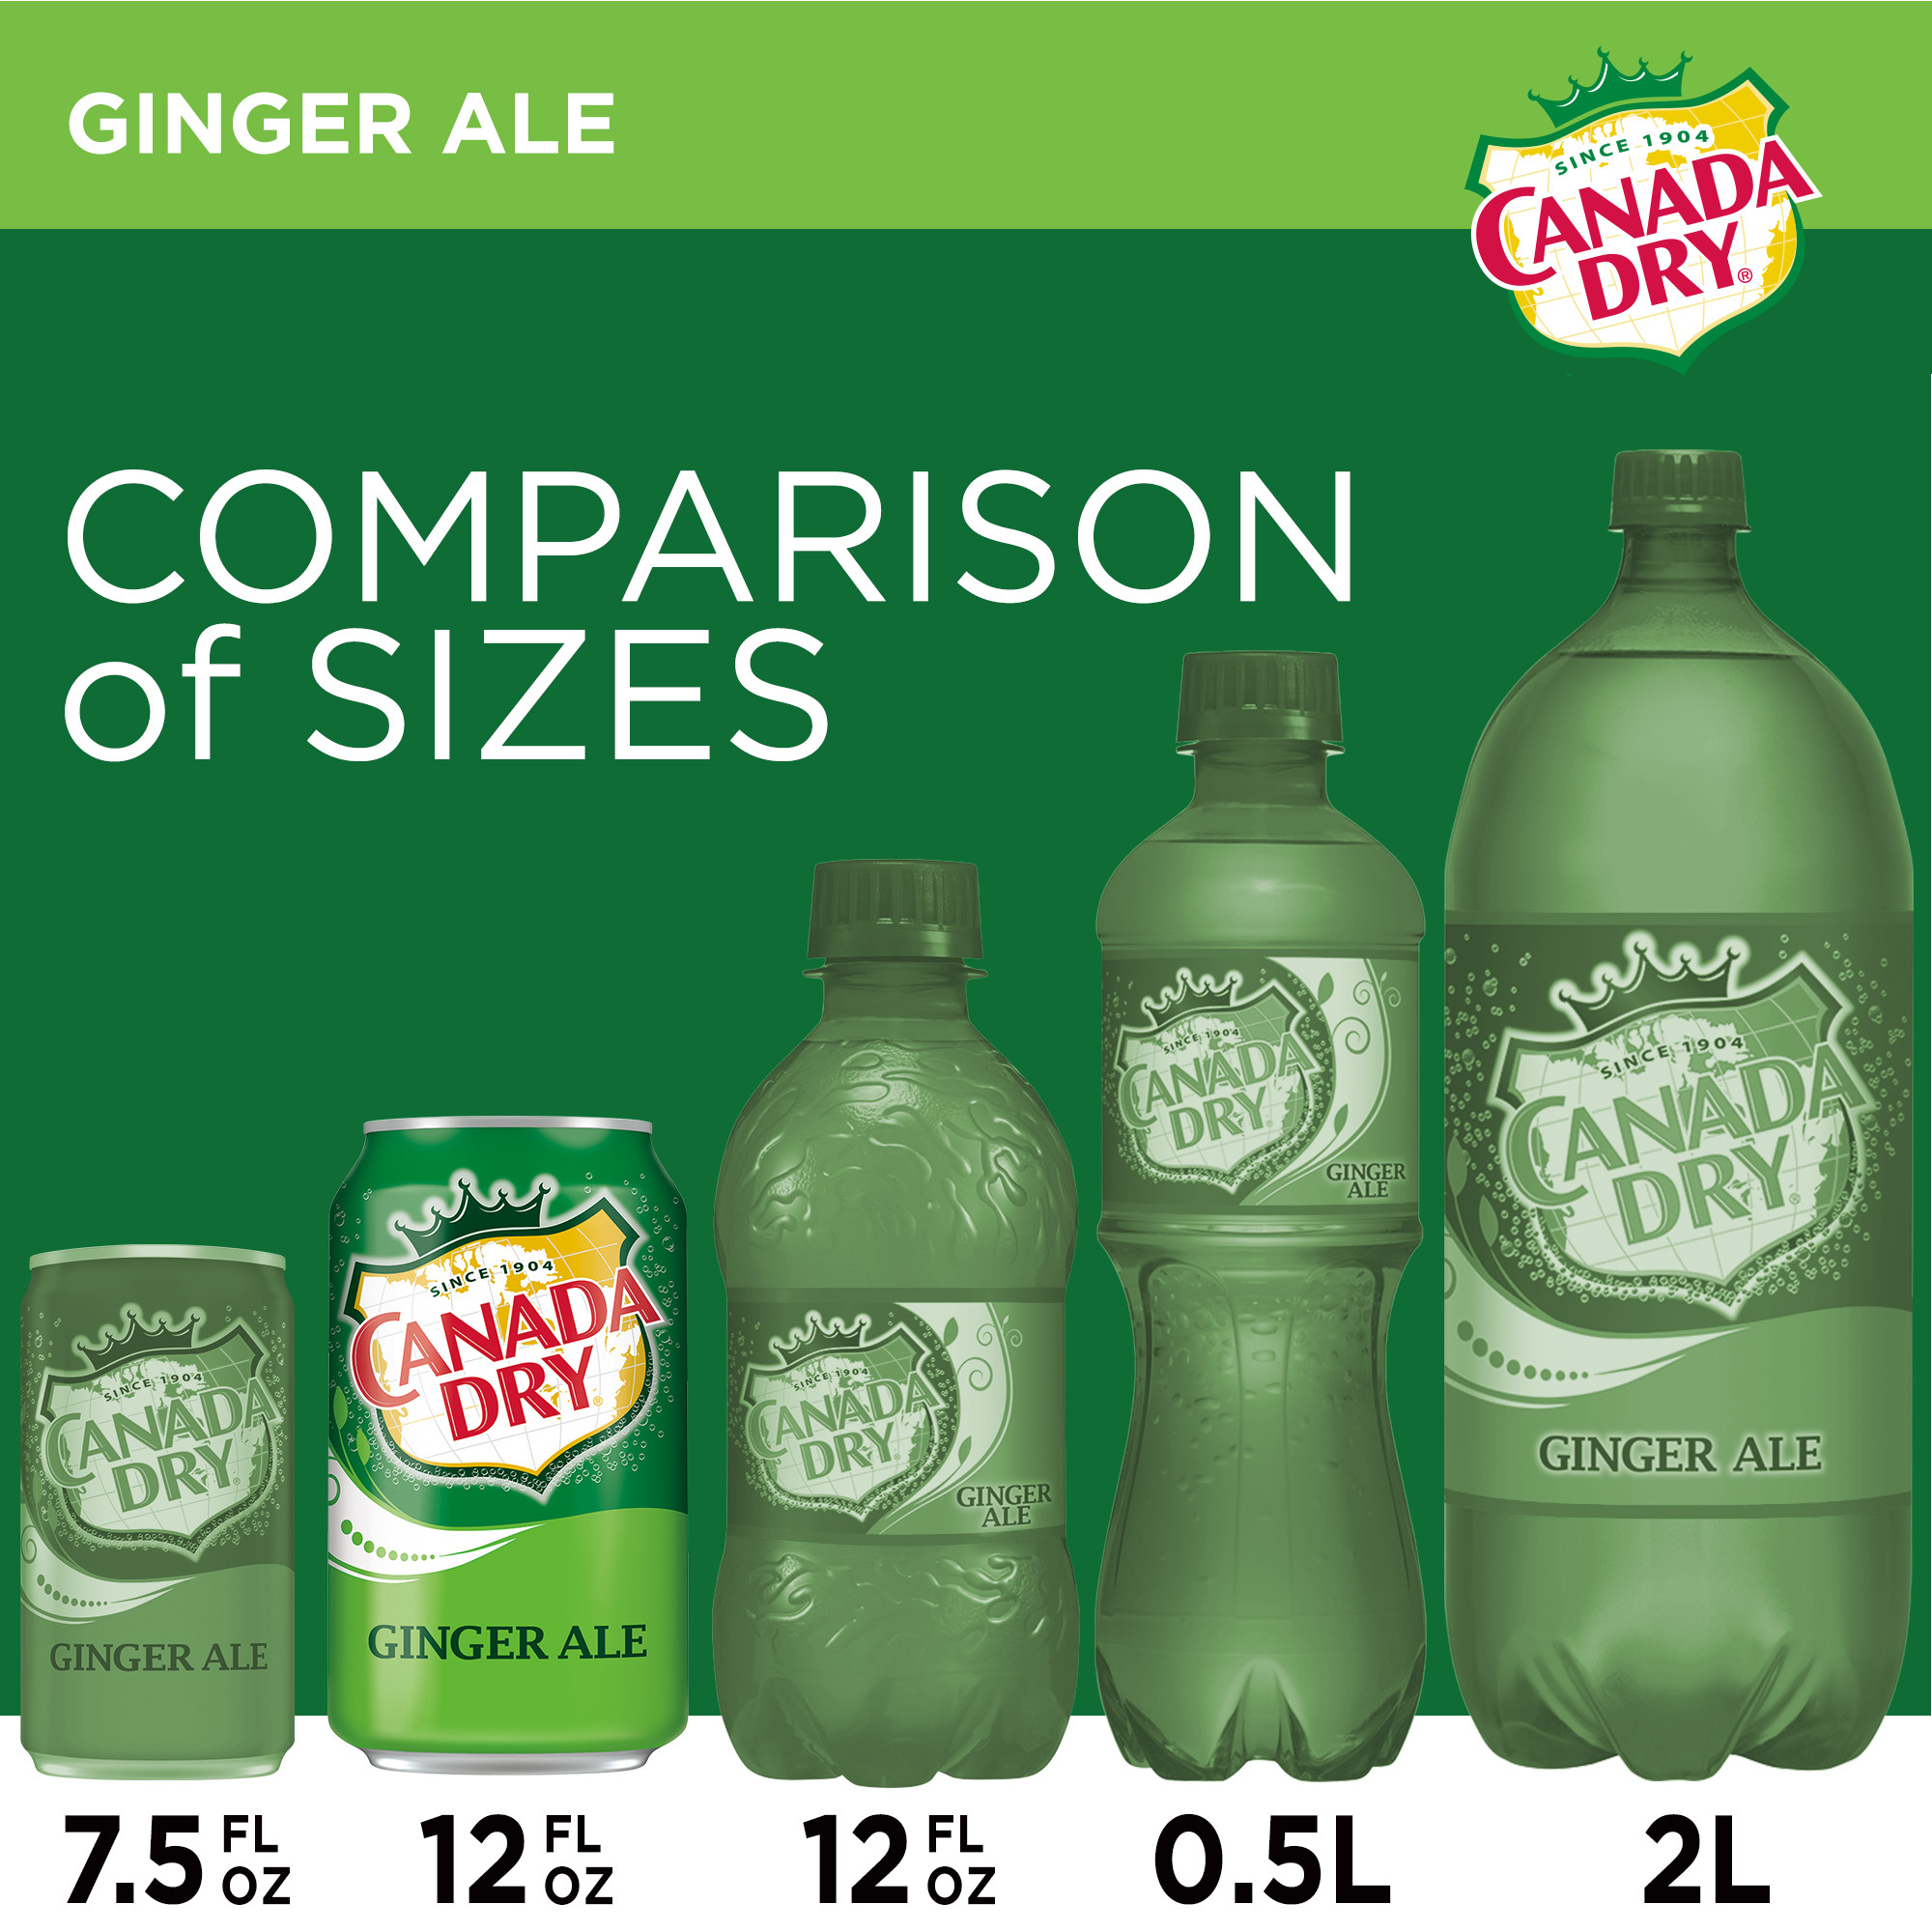 Canada Dry Caffeine Free Ginger Ale Soda Pop, 8 fl oz, 6 Pack Cans - image 4 of 9